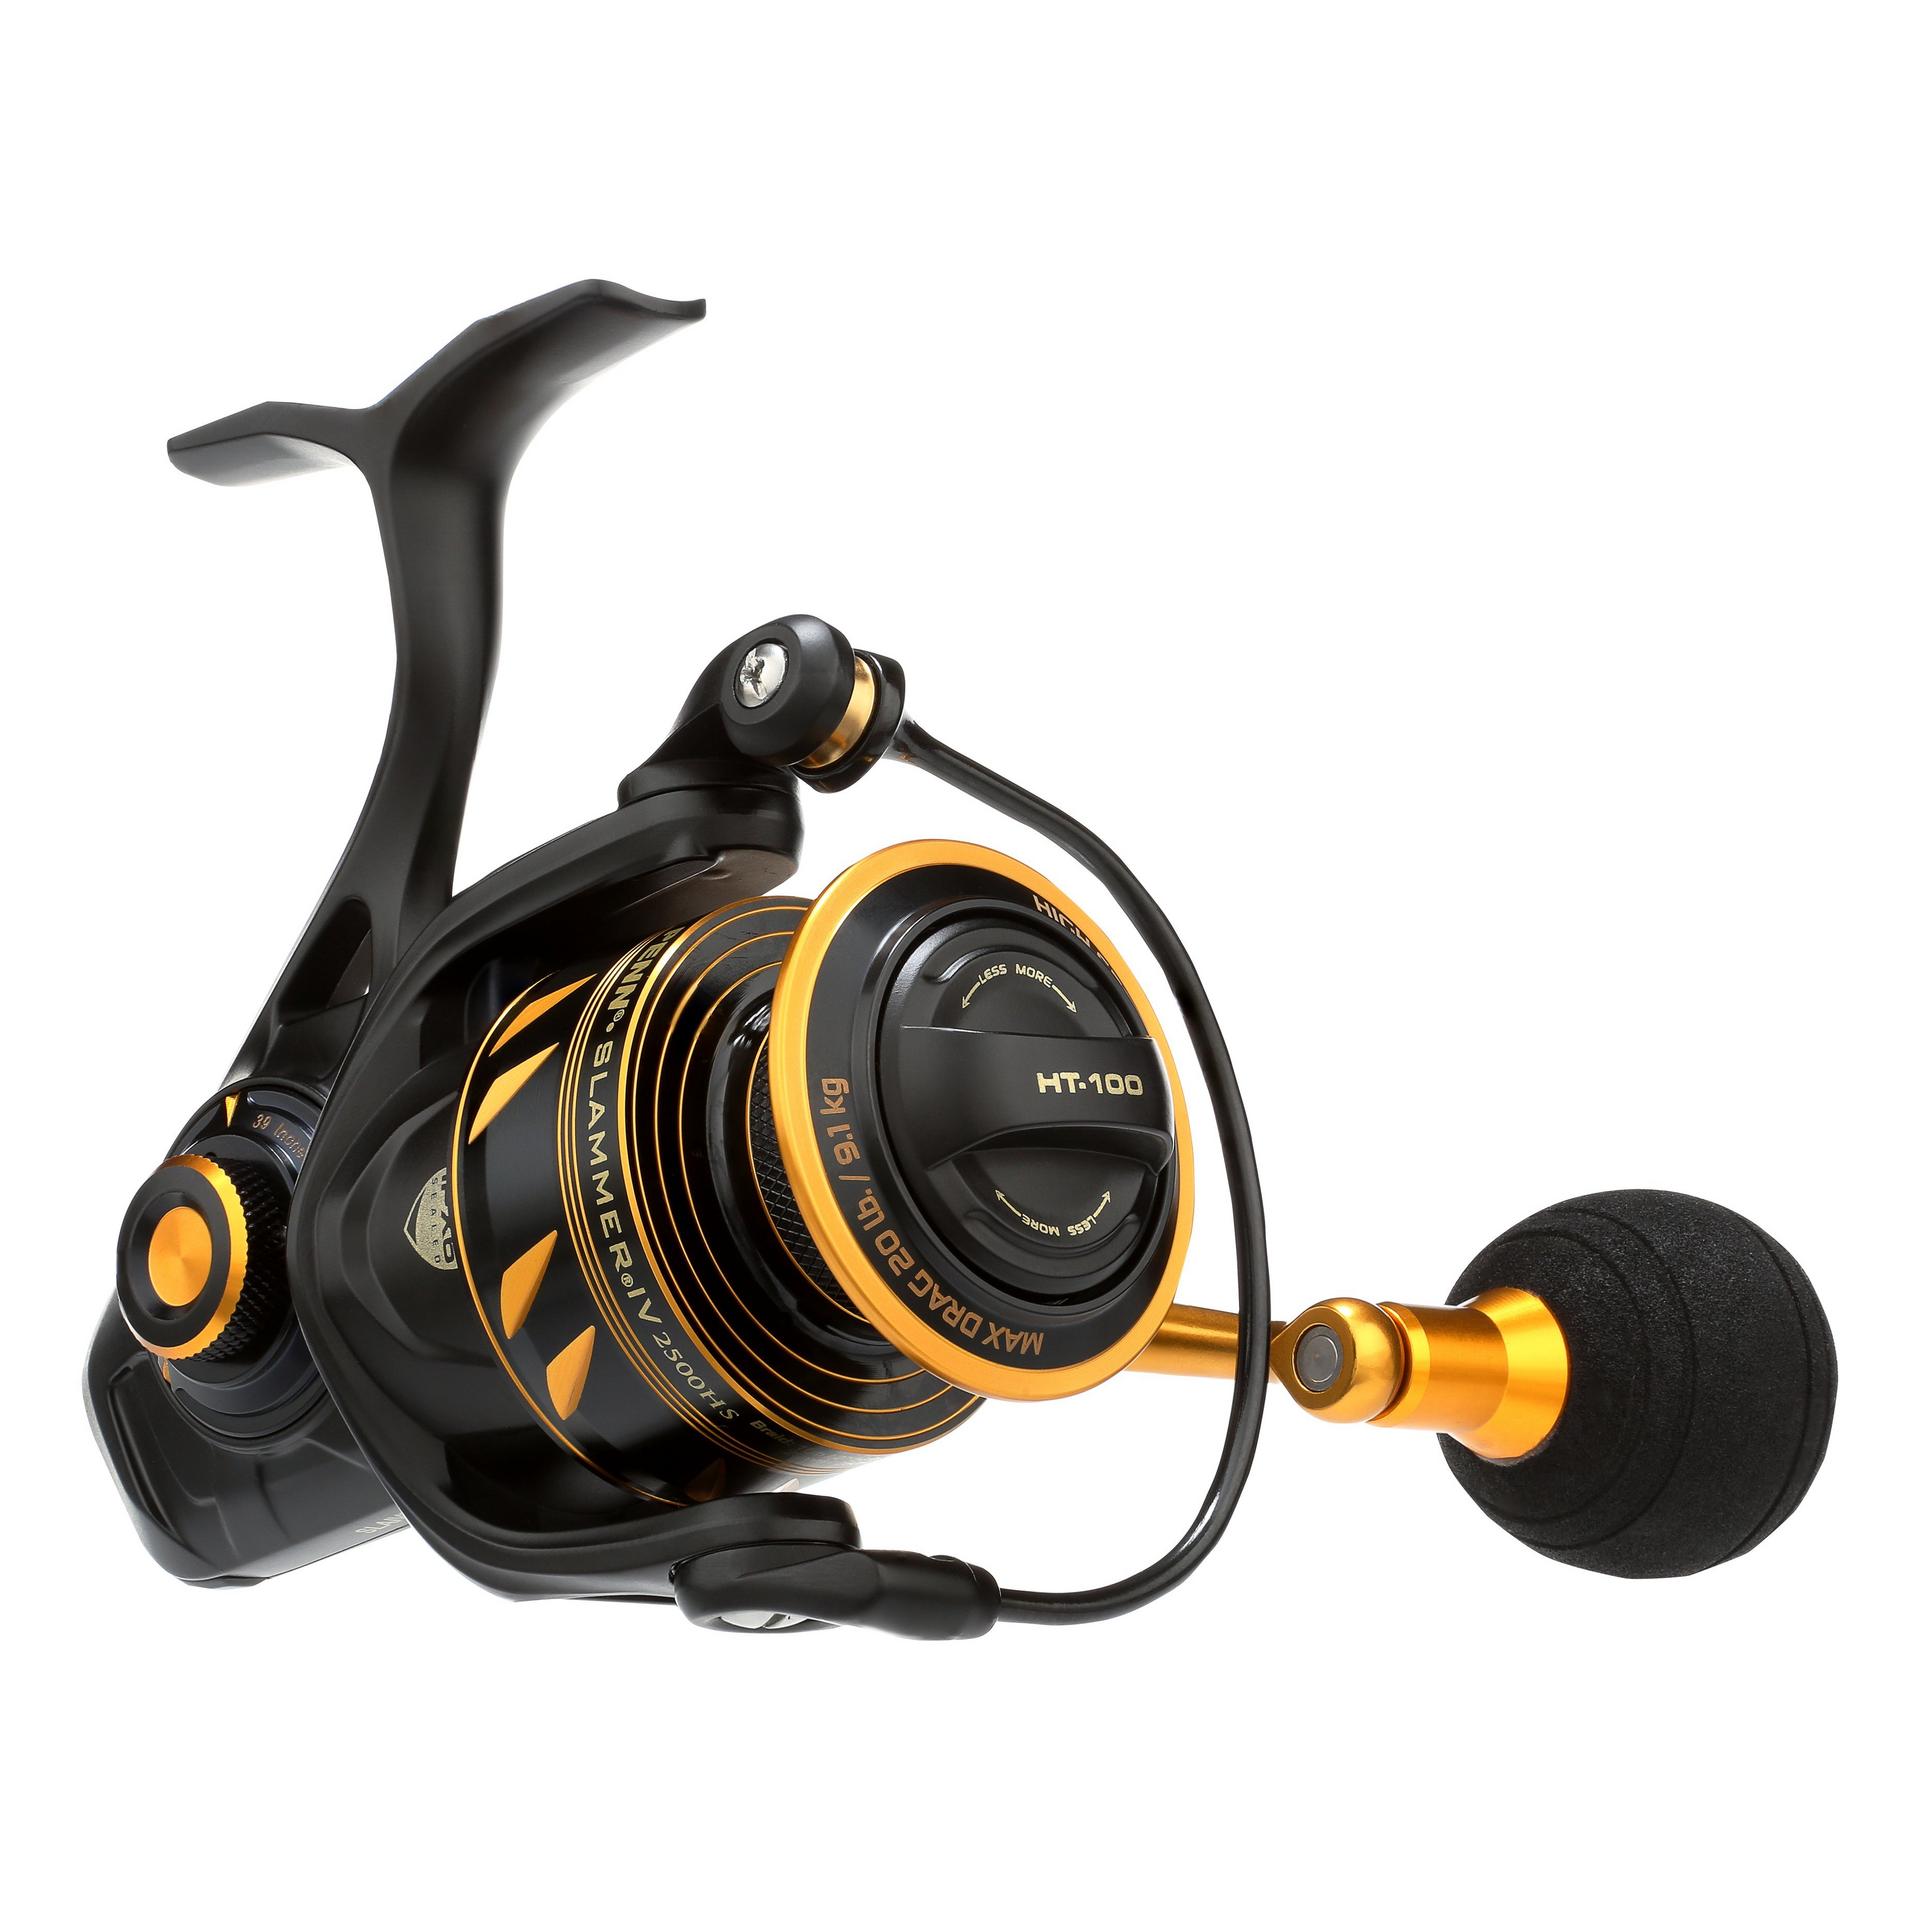 Penn Slammer Fixed Spool Reels - Review  Tackle Guide UK - Your Guide to Fishing  Tackle